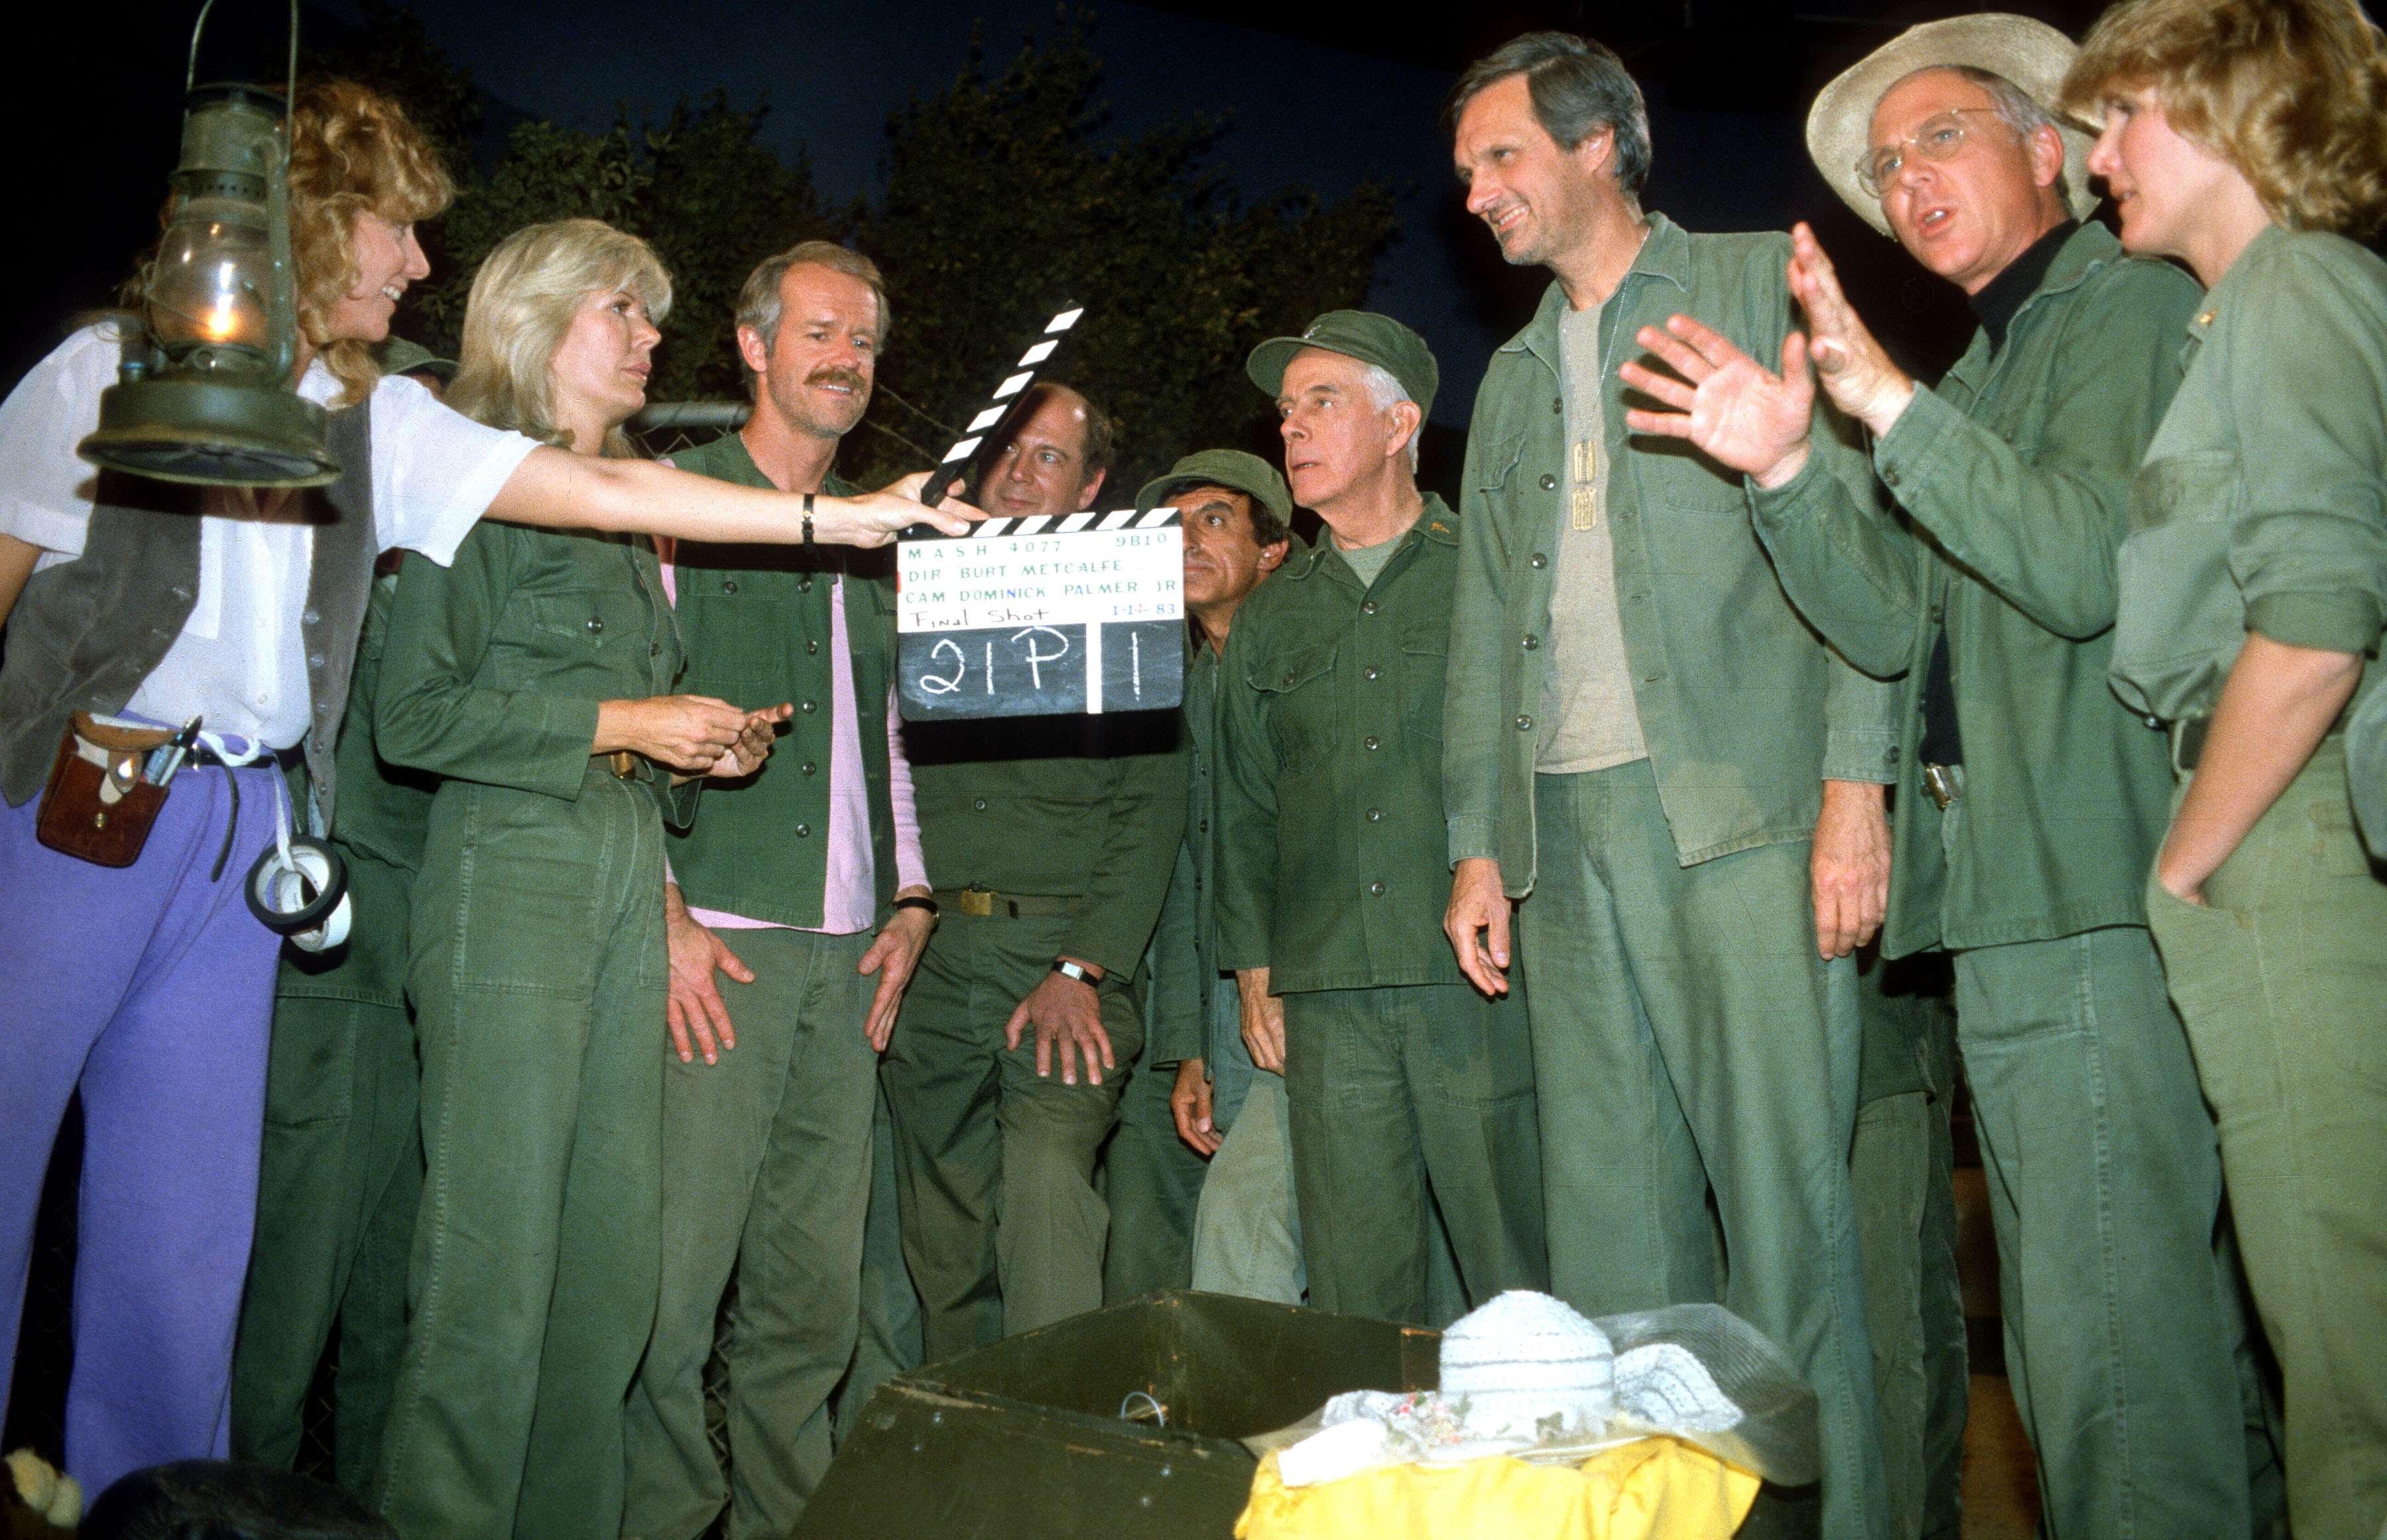 Loretta Swit, Mike Farrell, David Ogden Stiers, Jamie Farr, Harry Morgan, Alan Alda, William Christopher, and Judy Farrell on June 18, 1984 during the last episode of "M*A*S*H" . | Source: Getty Images